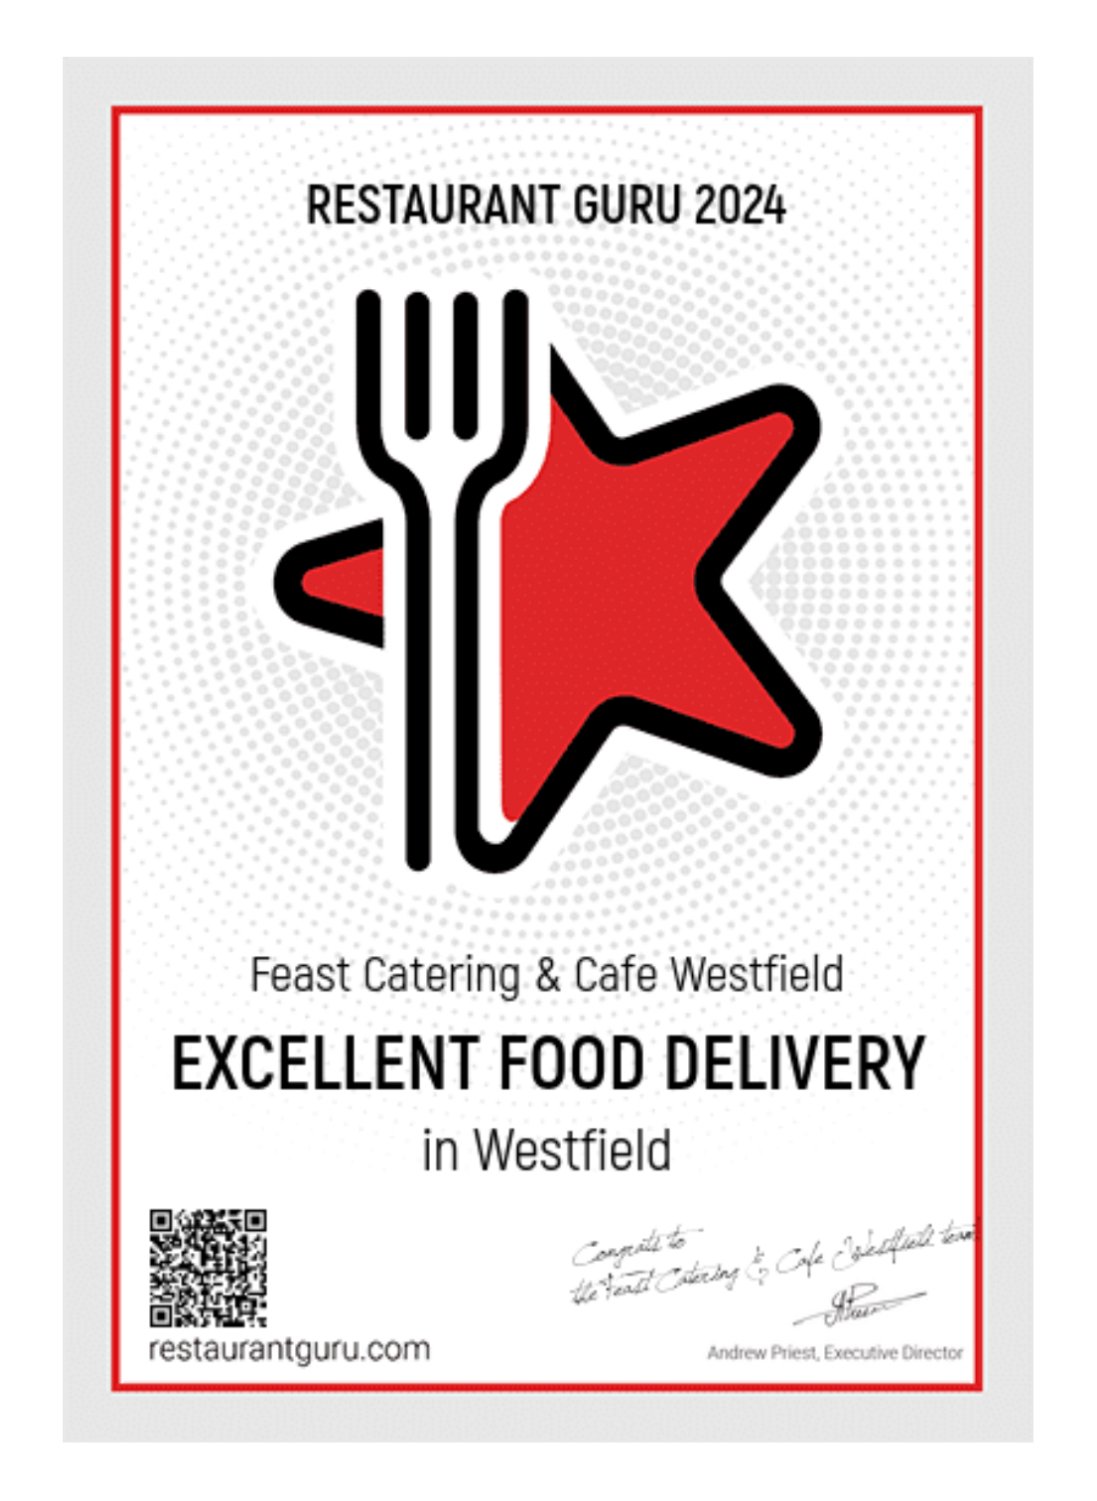 Thank you Restaurant Guru for our Excellent Food Delivery Award.  Providing fresh food directly to you is a passion of ours.  Order for delivery on our website or drop in and check out our Salad Bar, Sandwiches, Daily Fresh Cabinet and Catering! 
#27